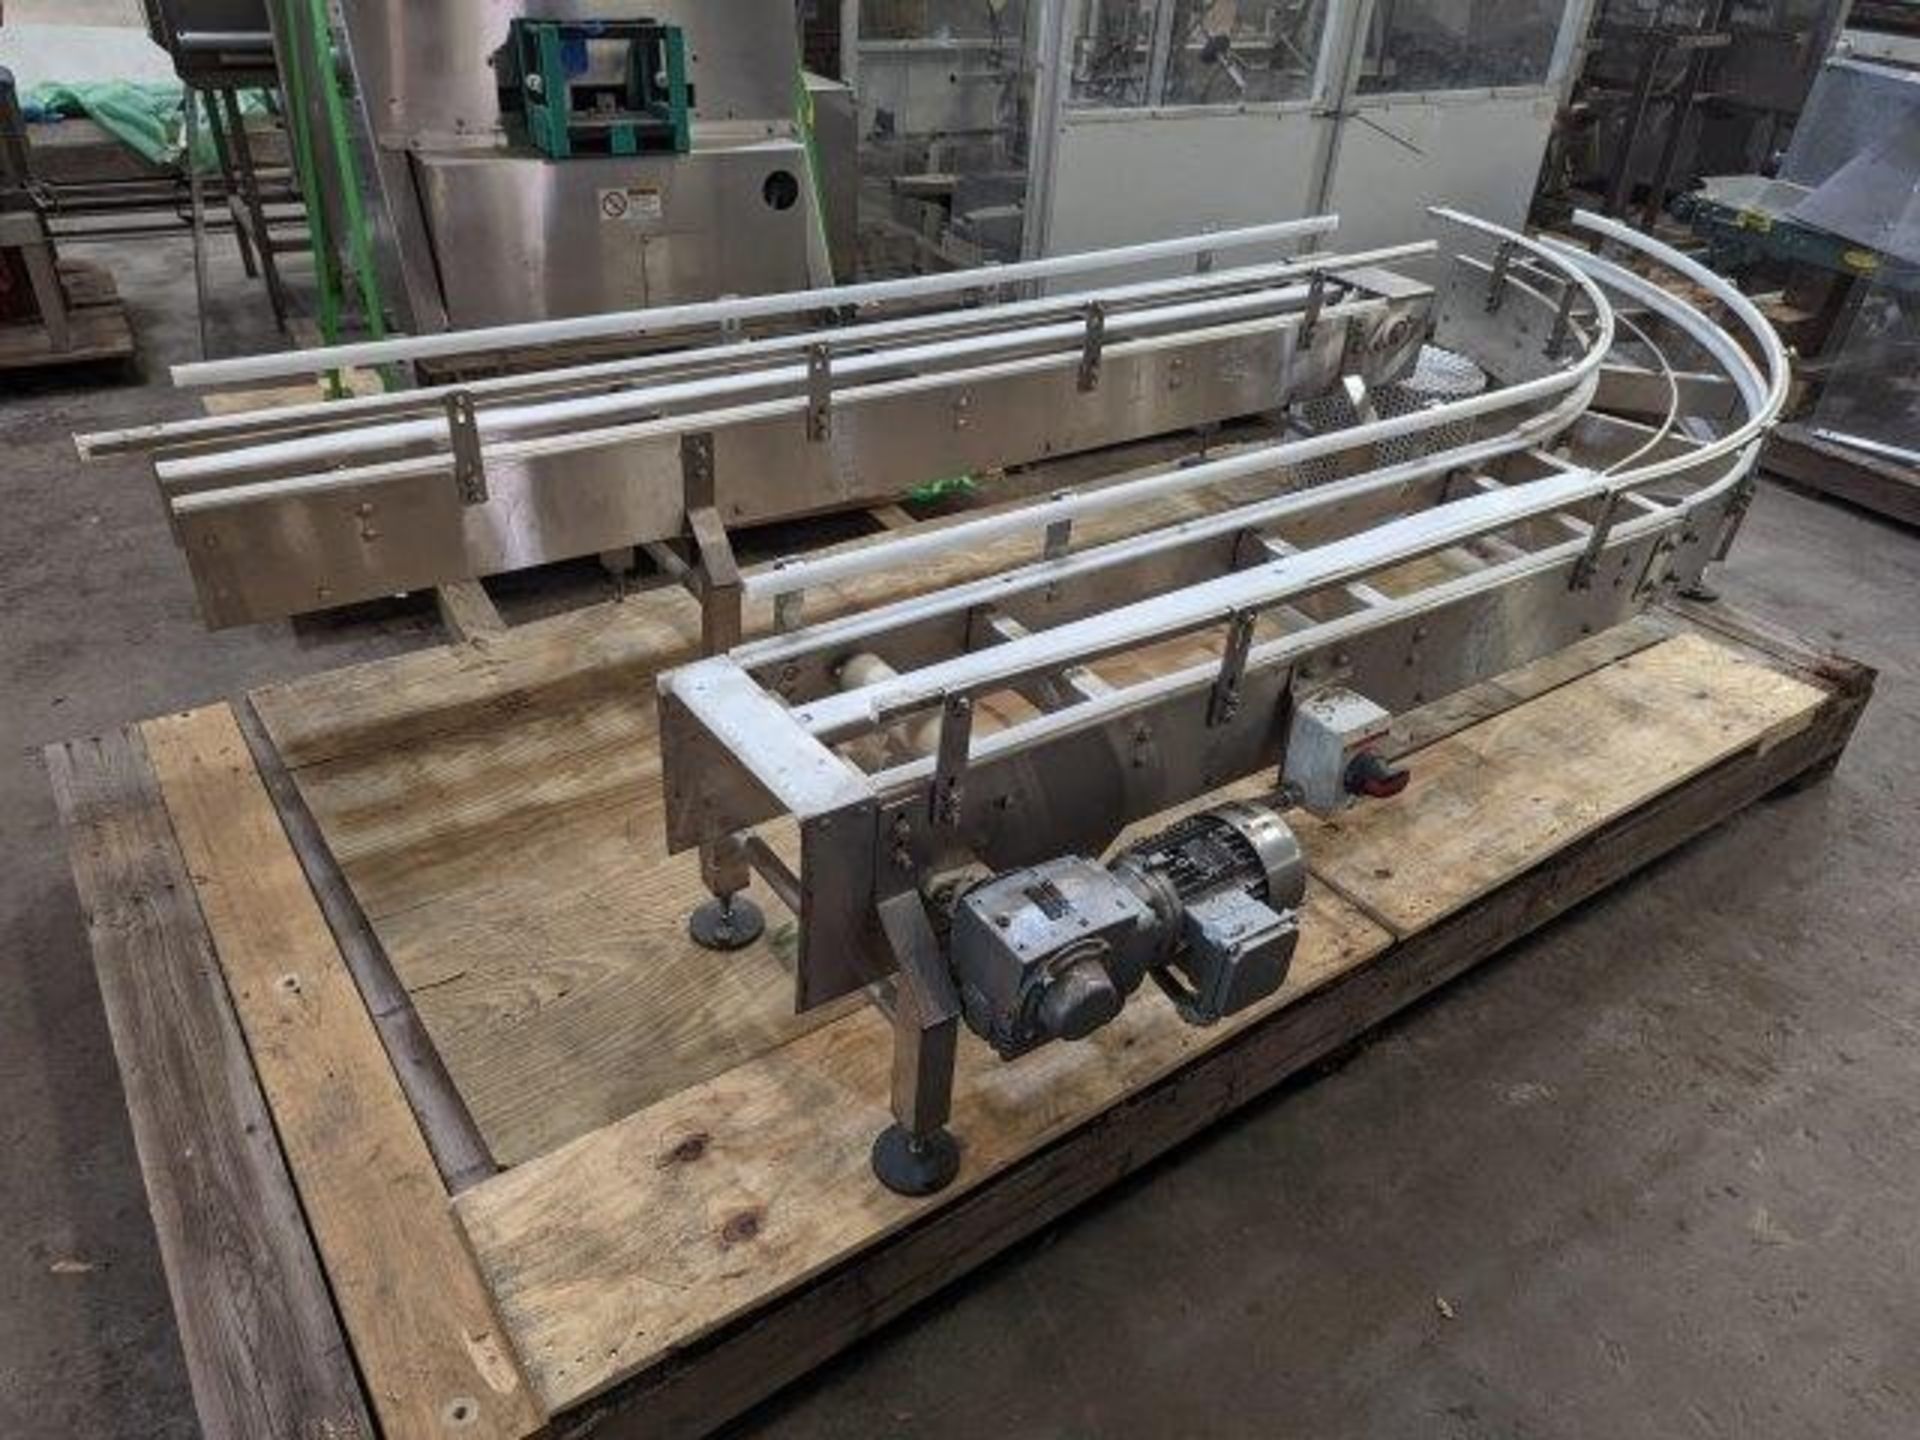 90-Degree Conveyor with Motor; 18' total length (10' for rounded 90 & 8' for straight piece; Some